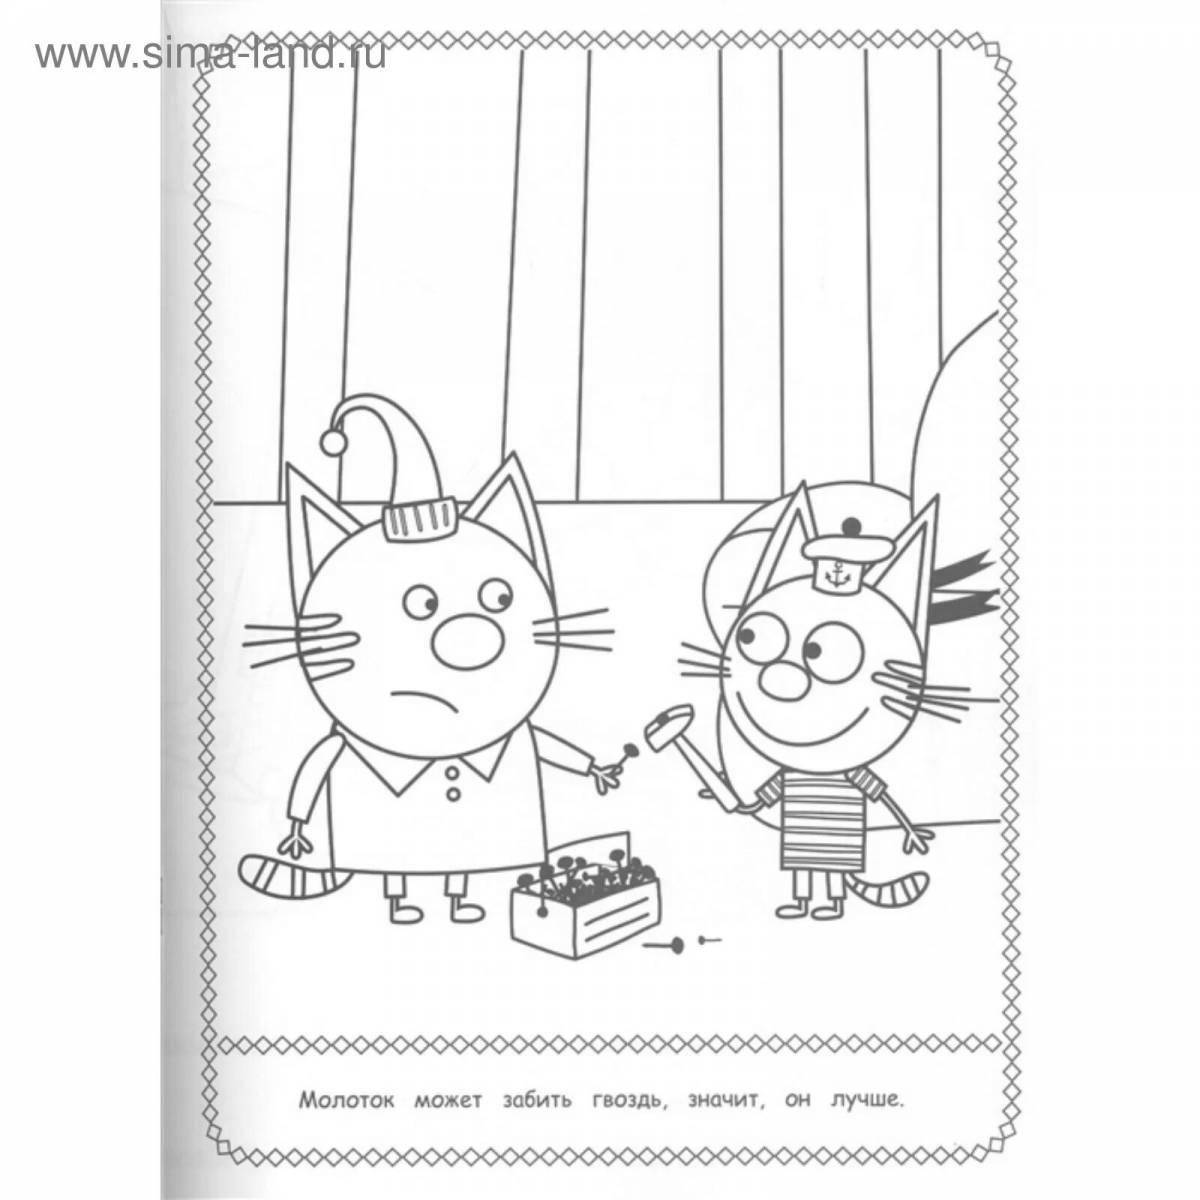 Exciting 3 cats coloring book for kids